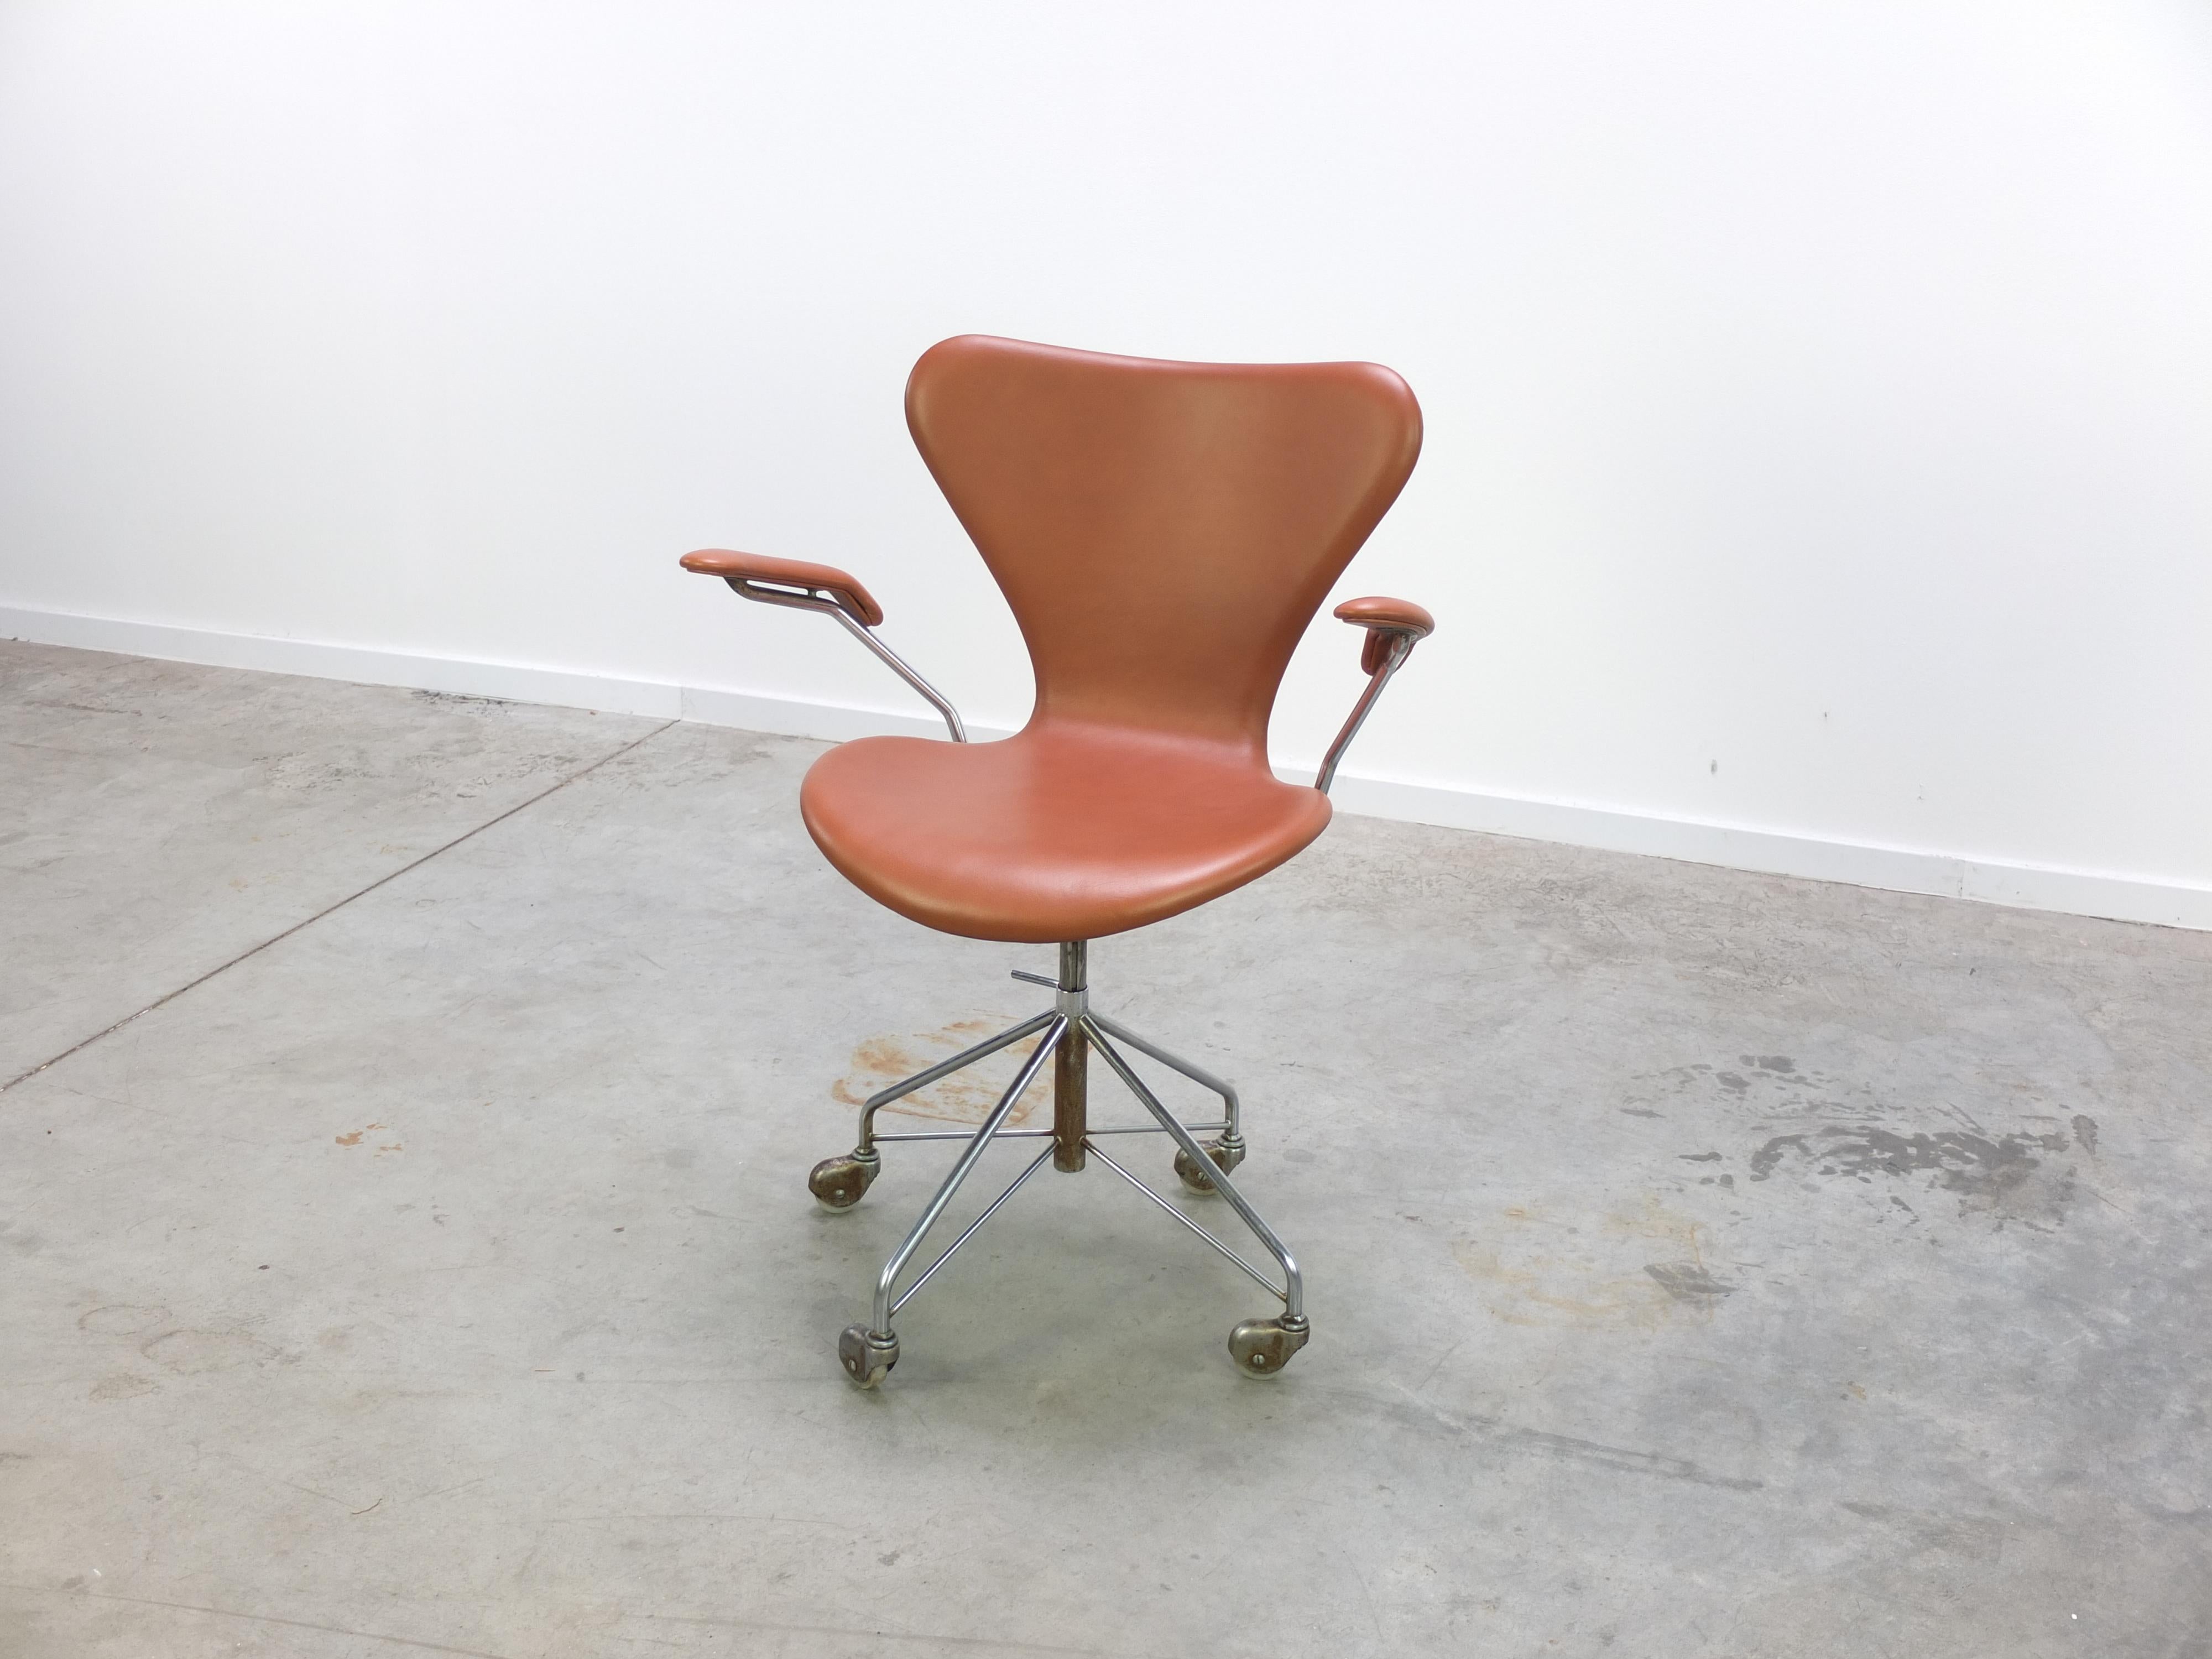 Rare model ‘3217’ office swivel chair with armrests designed by Arne Jacobsen for Fritz Hansen in 1955. This chair is an early production from the 1960s with a chrome-plated steel swivel base with 4 castors. Newly upholstered by a former Fritz